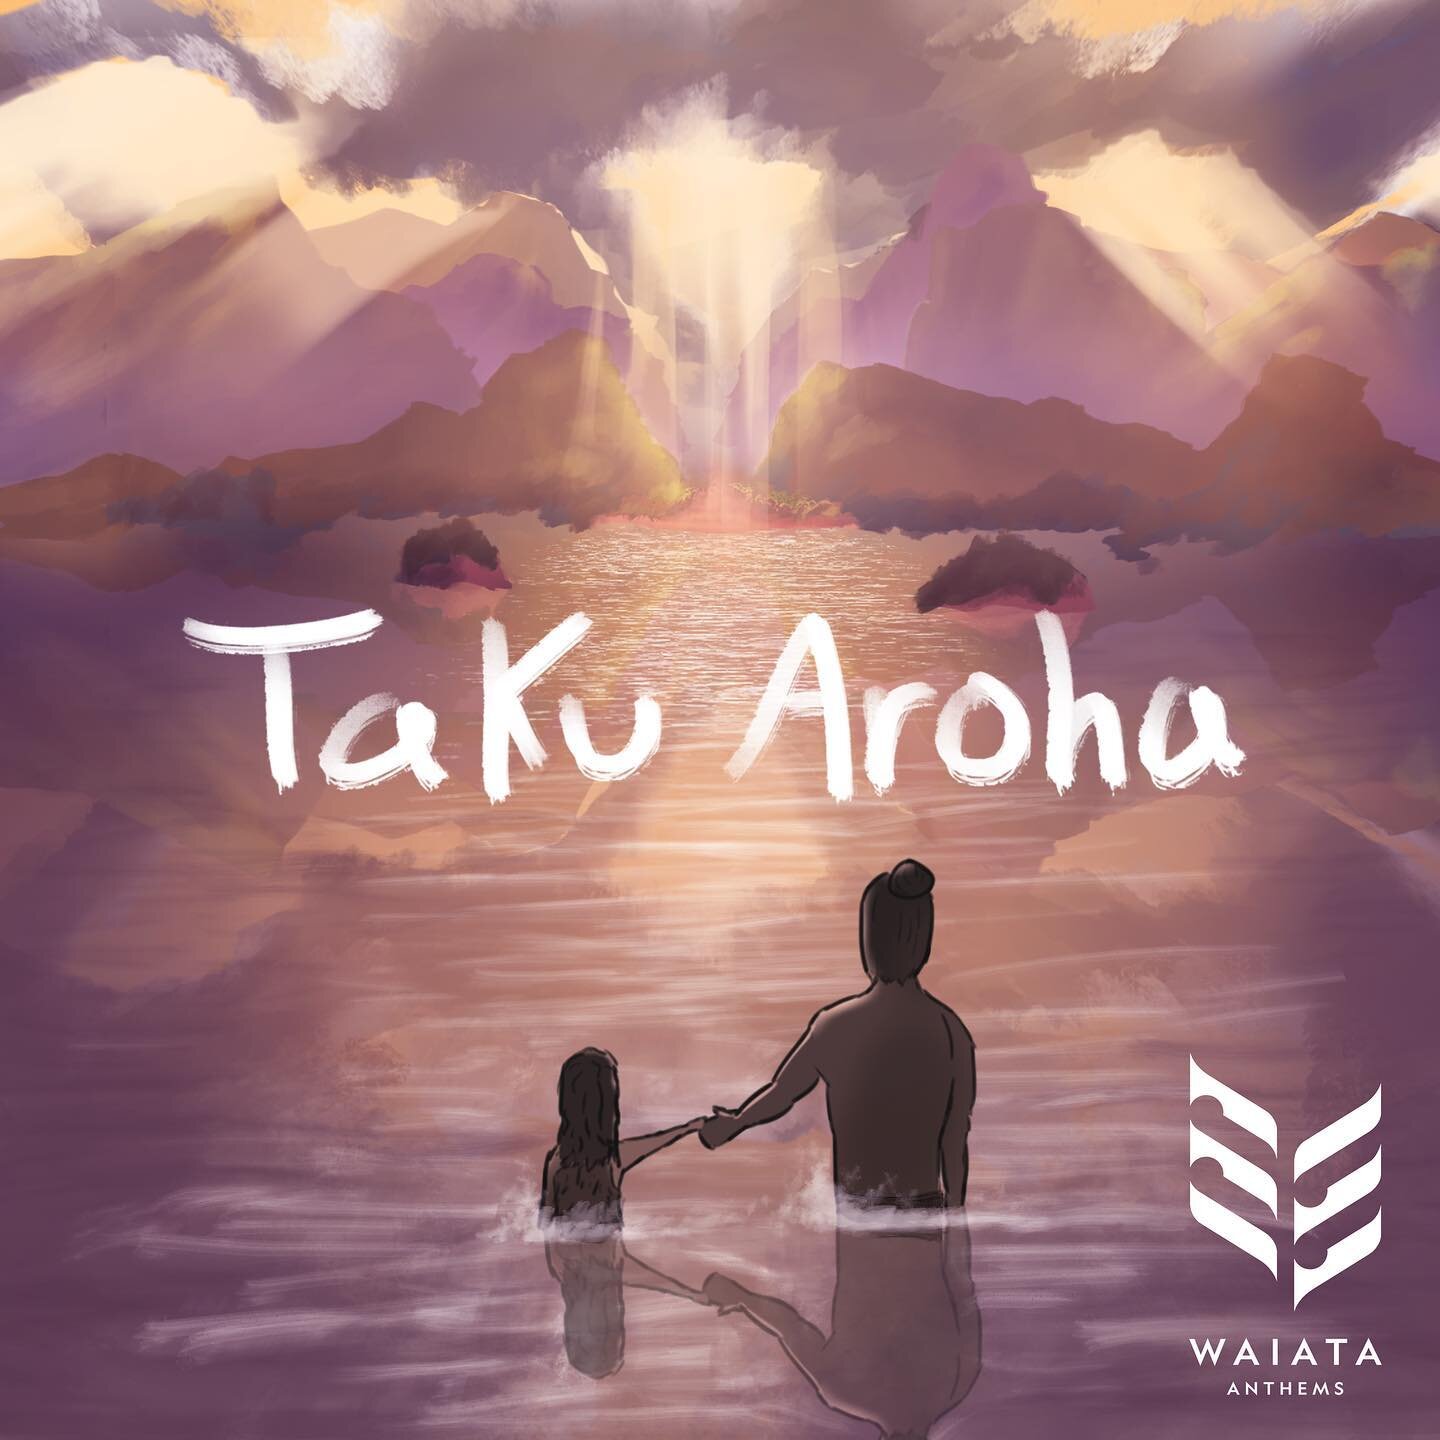 Thank you so much to everyone who has already streamed our new waiata &lsquo;Taku Aroha&rdquo; 💜 its pretty sick to see it on these playlists! If you havent listened to it yet, link is in our bio. Kia ora!